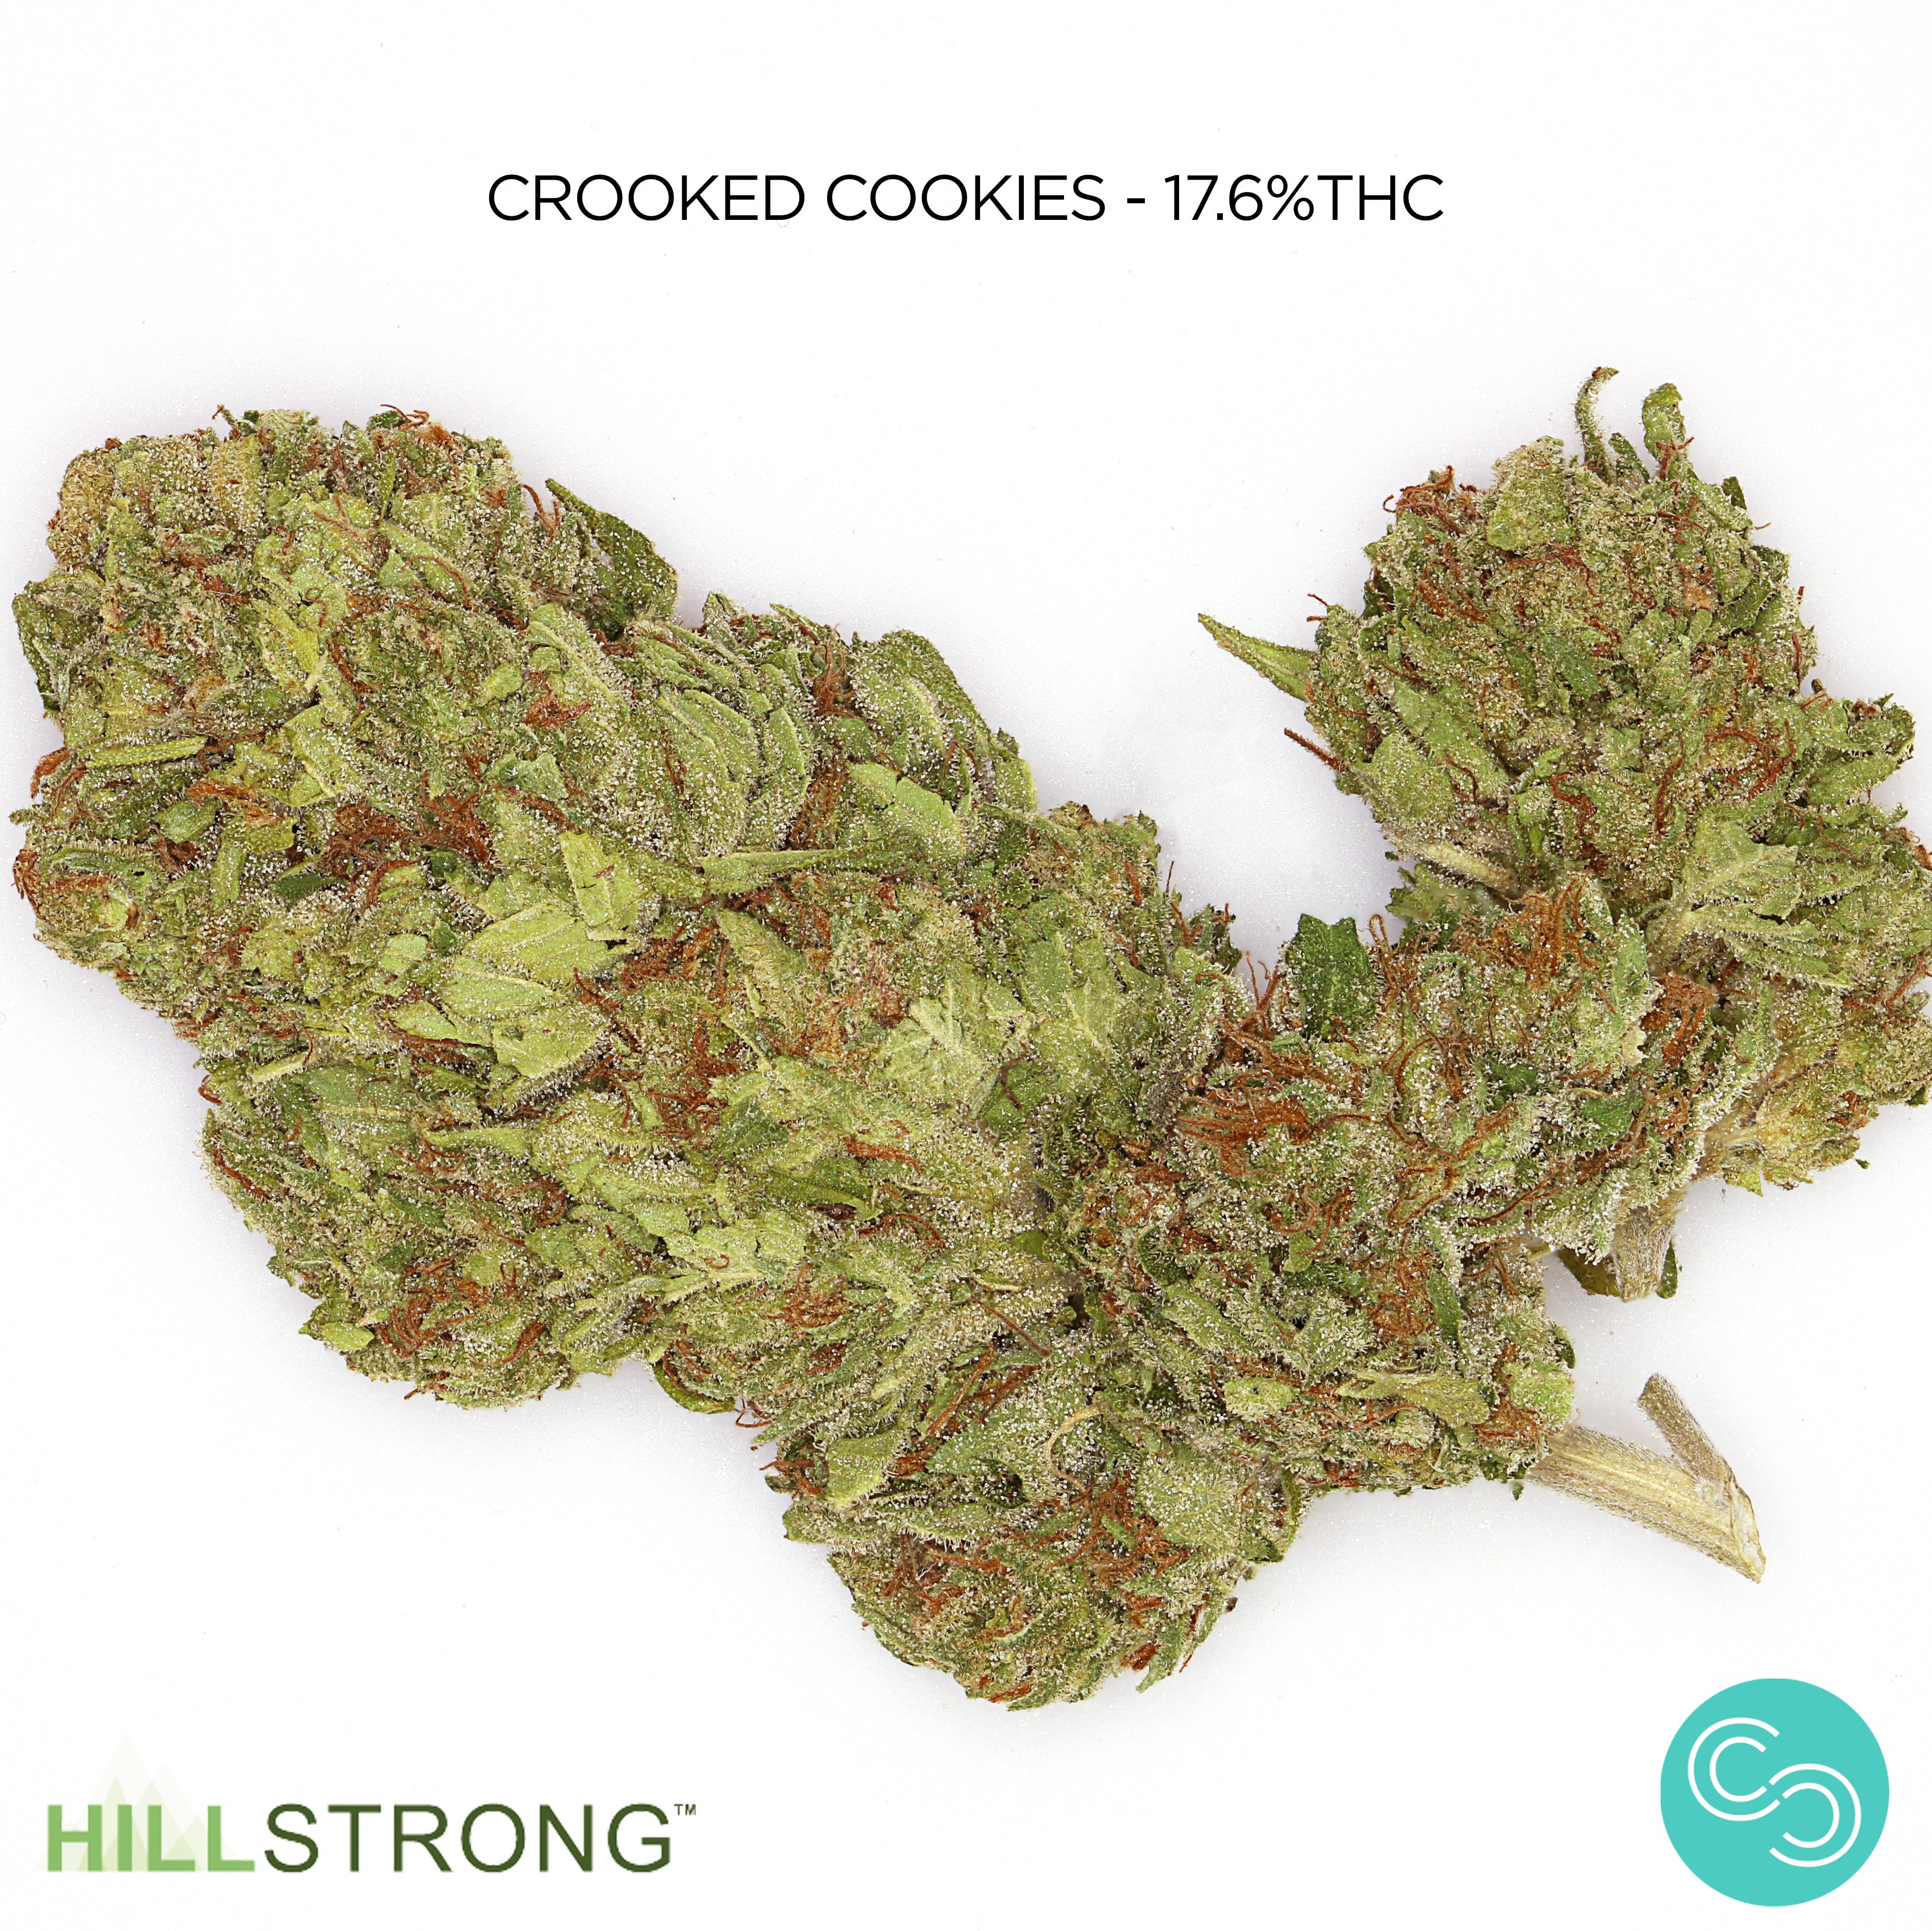 Hillstrong - Crooked Cookies - 17.6% THC